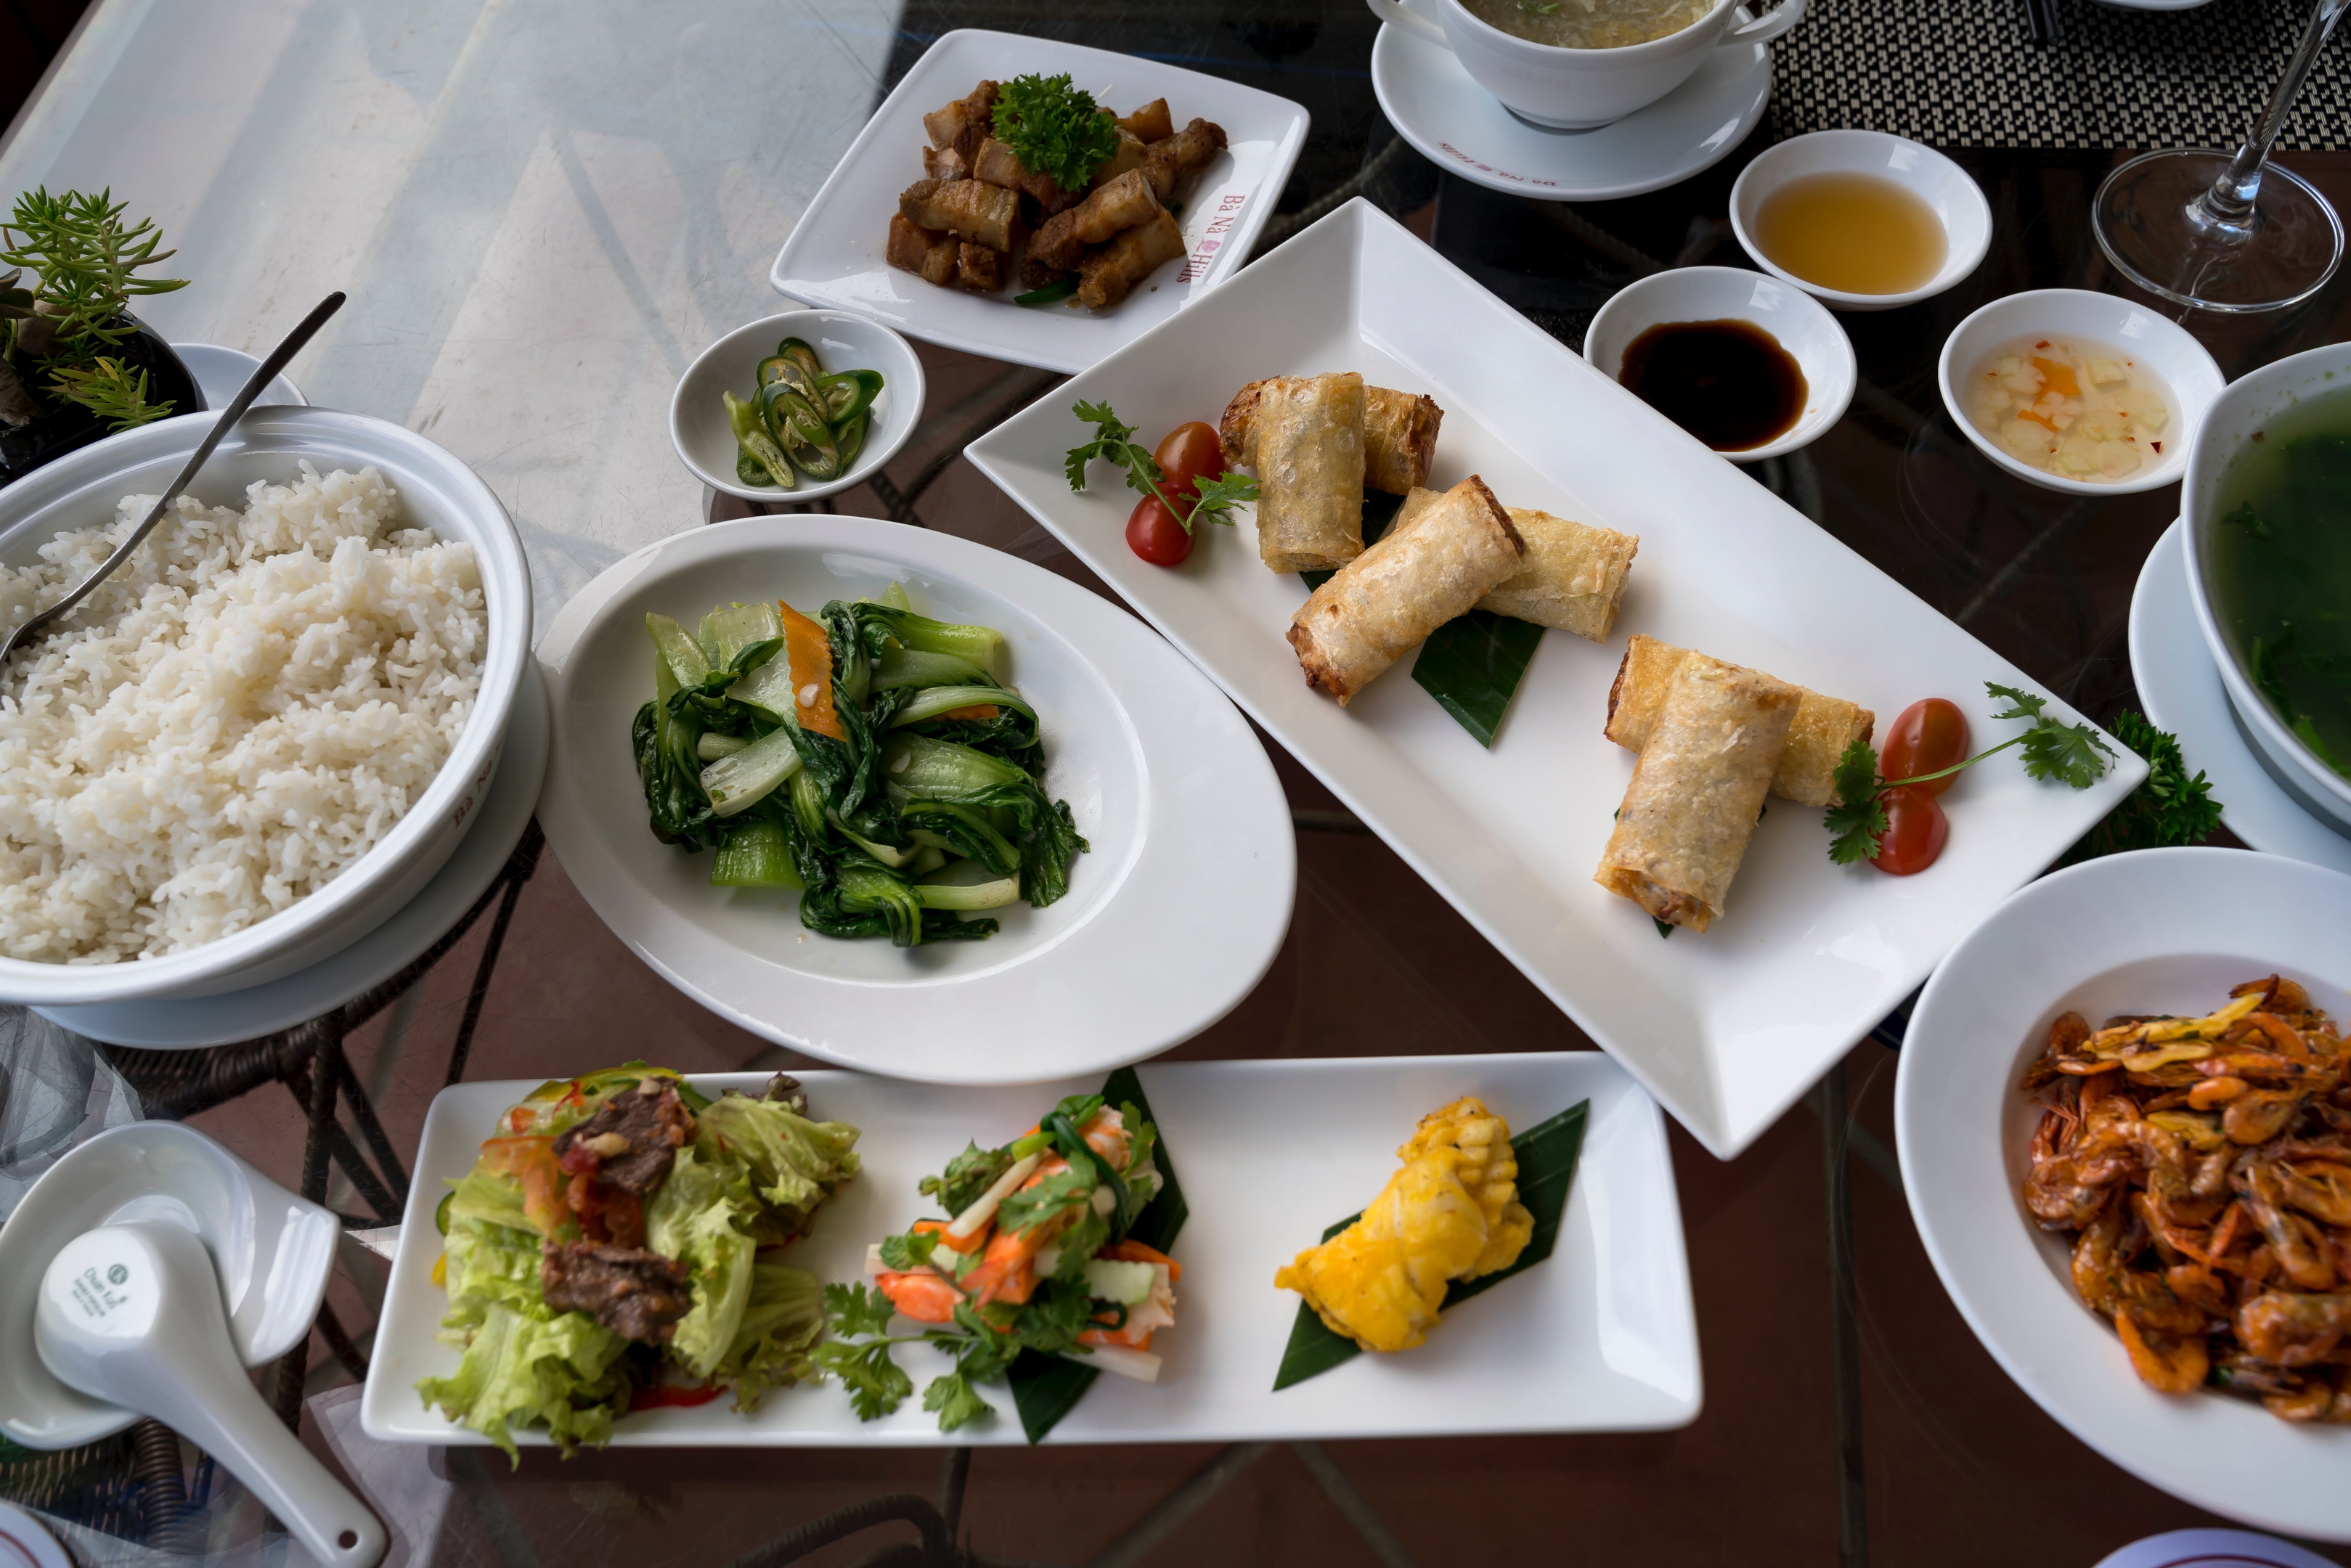 Thai cuisine spread showcasing a variety of flavourful dishes including spring rolls, jasmine rice, and more.